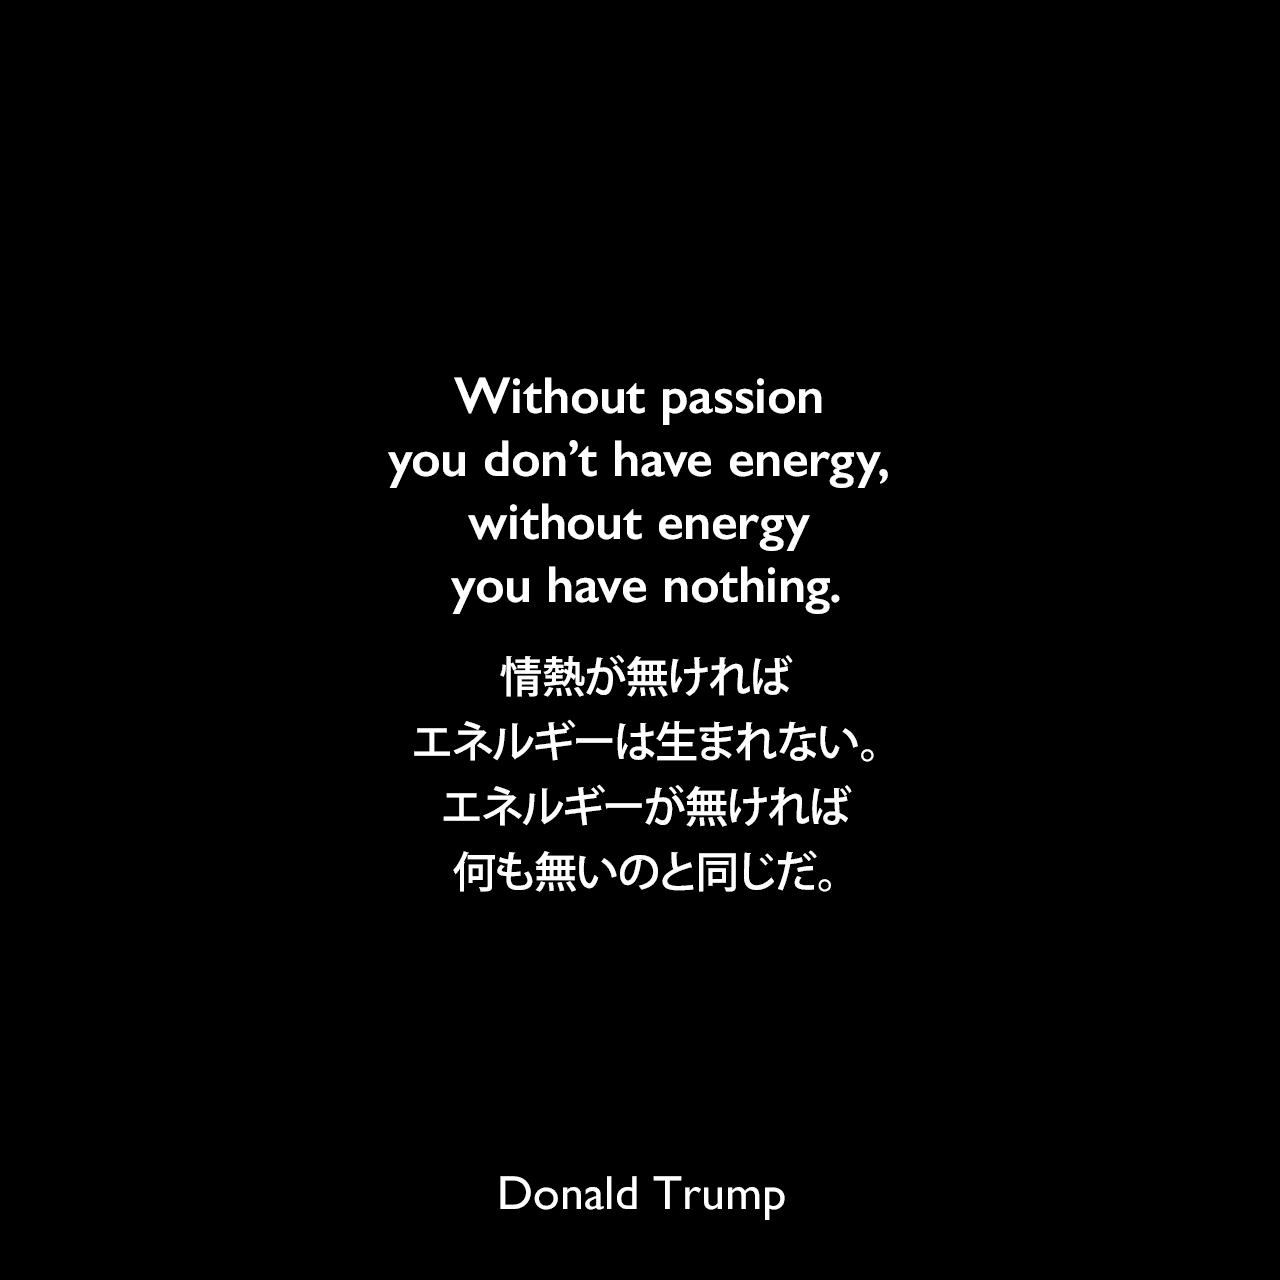 Without passion you don’t have energy, without energy you have nothing.情熱が無ければ、エネルギーは生まれない。エネルギーが無ければ、何も無いのと同じだ。- マイケル・ボルキンによる本「Social Networking for Authors-Untapped Possibilities for Wealth」よりDonald Trump